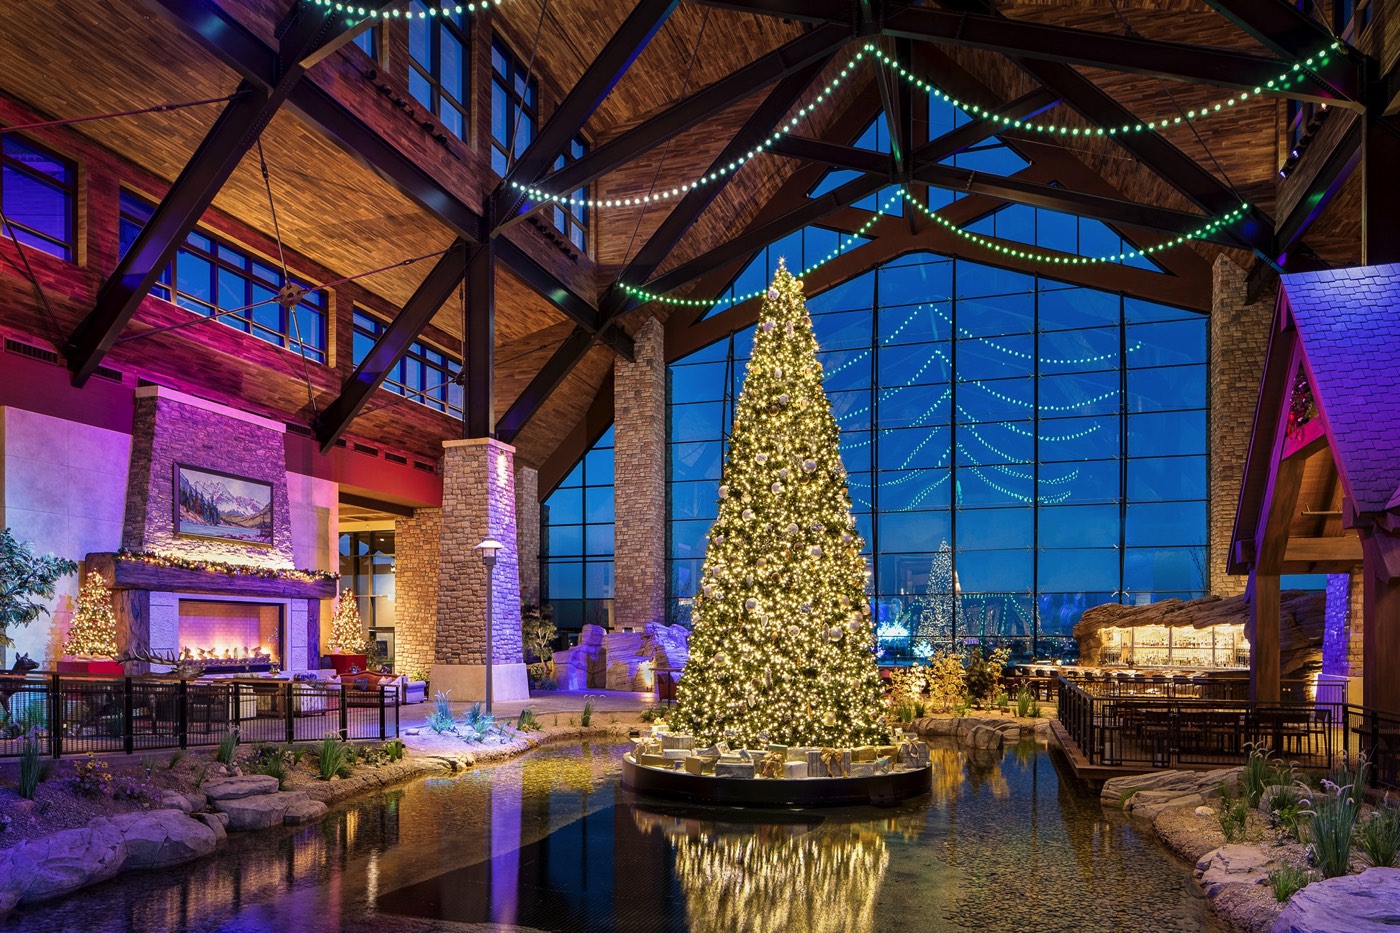 GAYLORD ROCKIES CHRISTMAS: YOUR GUIDE TO A FESTIVE FAMILY TRADITION